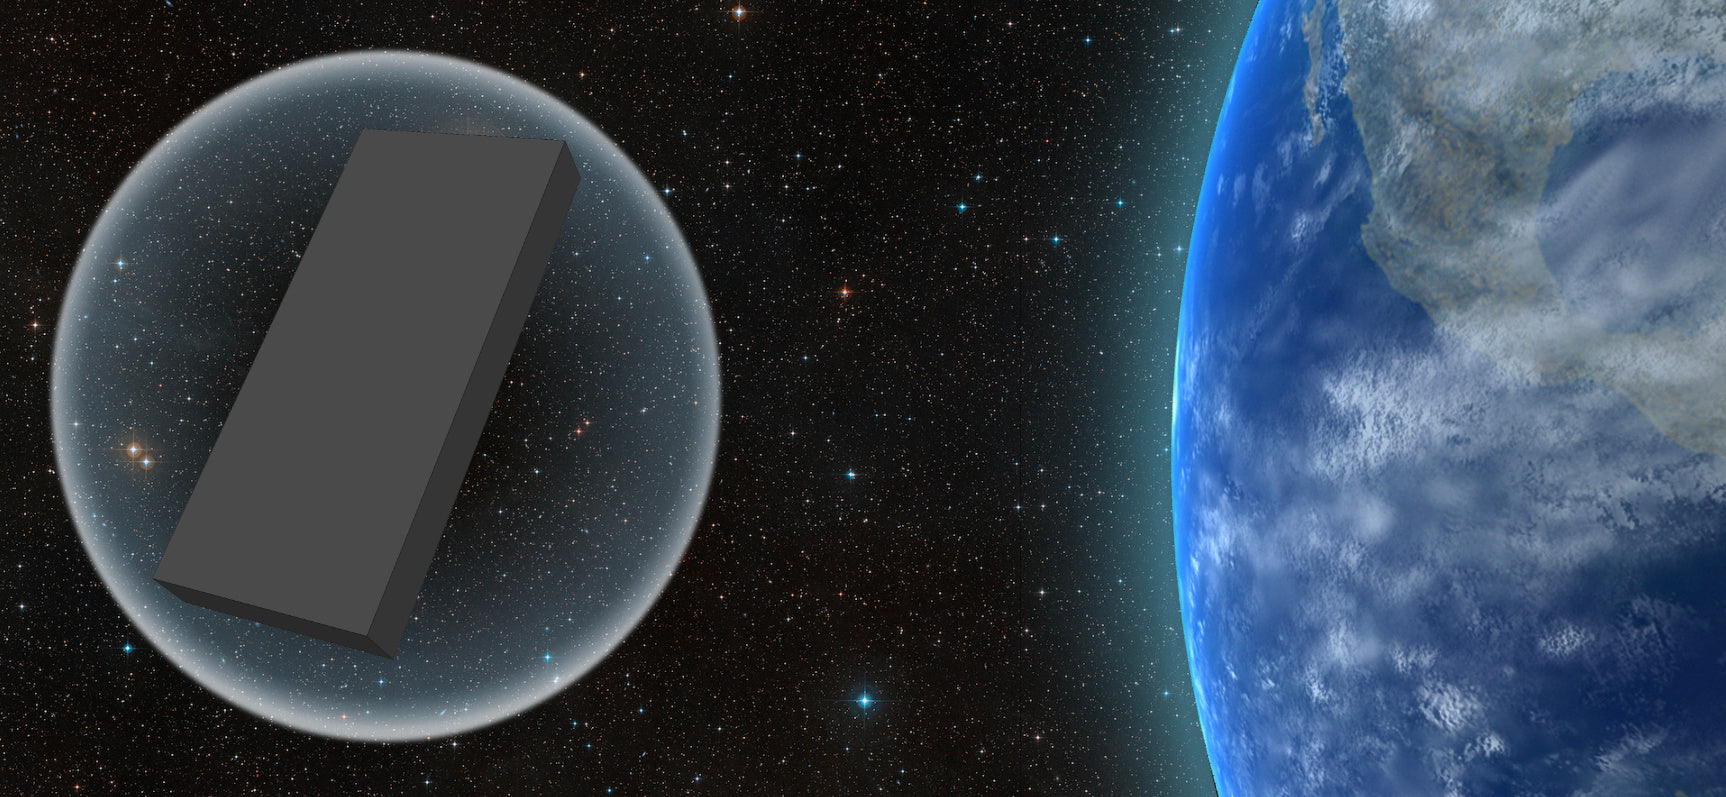 Advanced Monolithix Hero image depicting a “starchild monolith” approaching the Earth